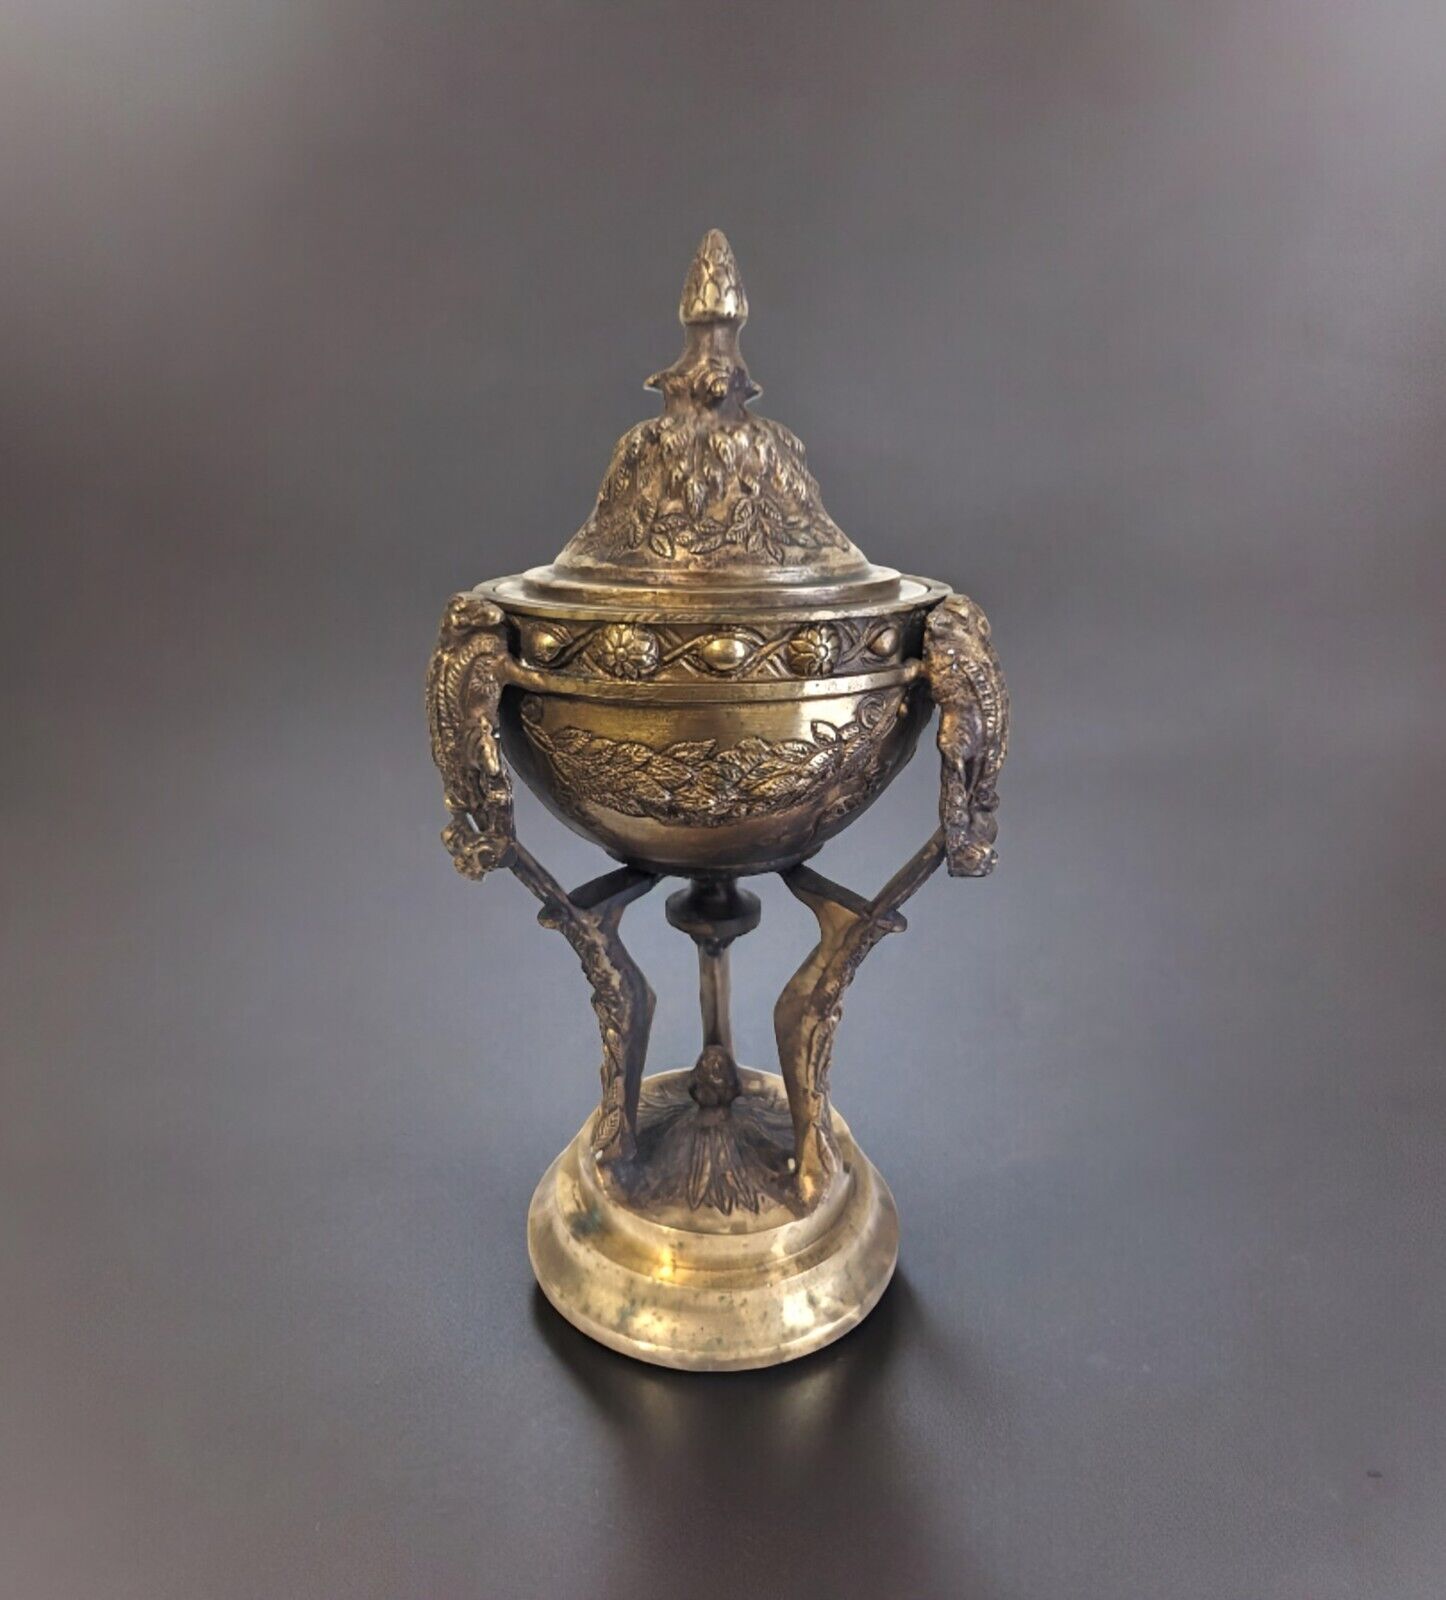 Vintage Neo-Classical Solid Brass Urn